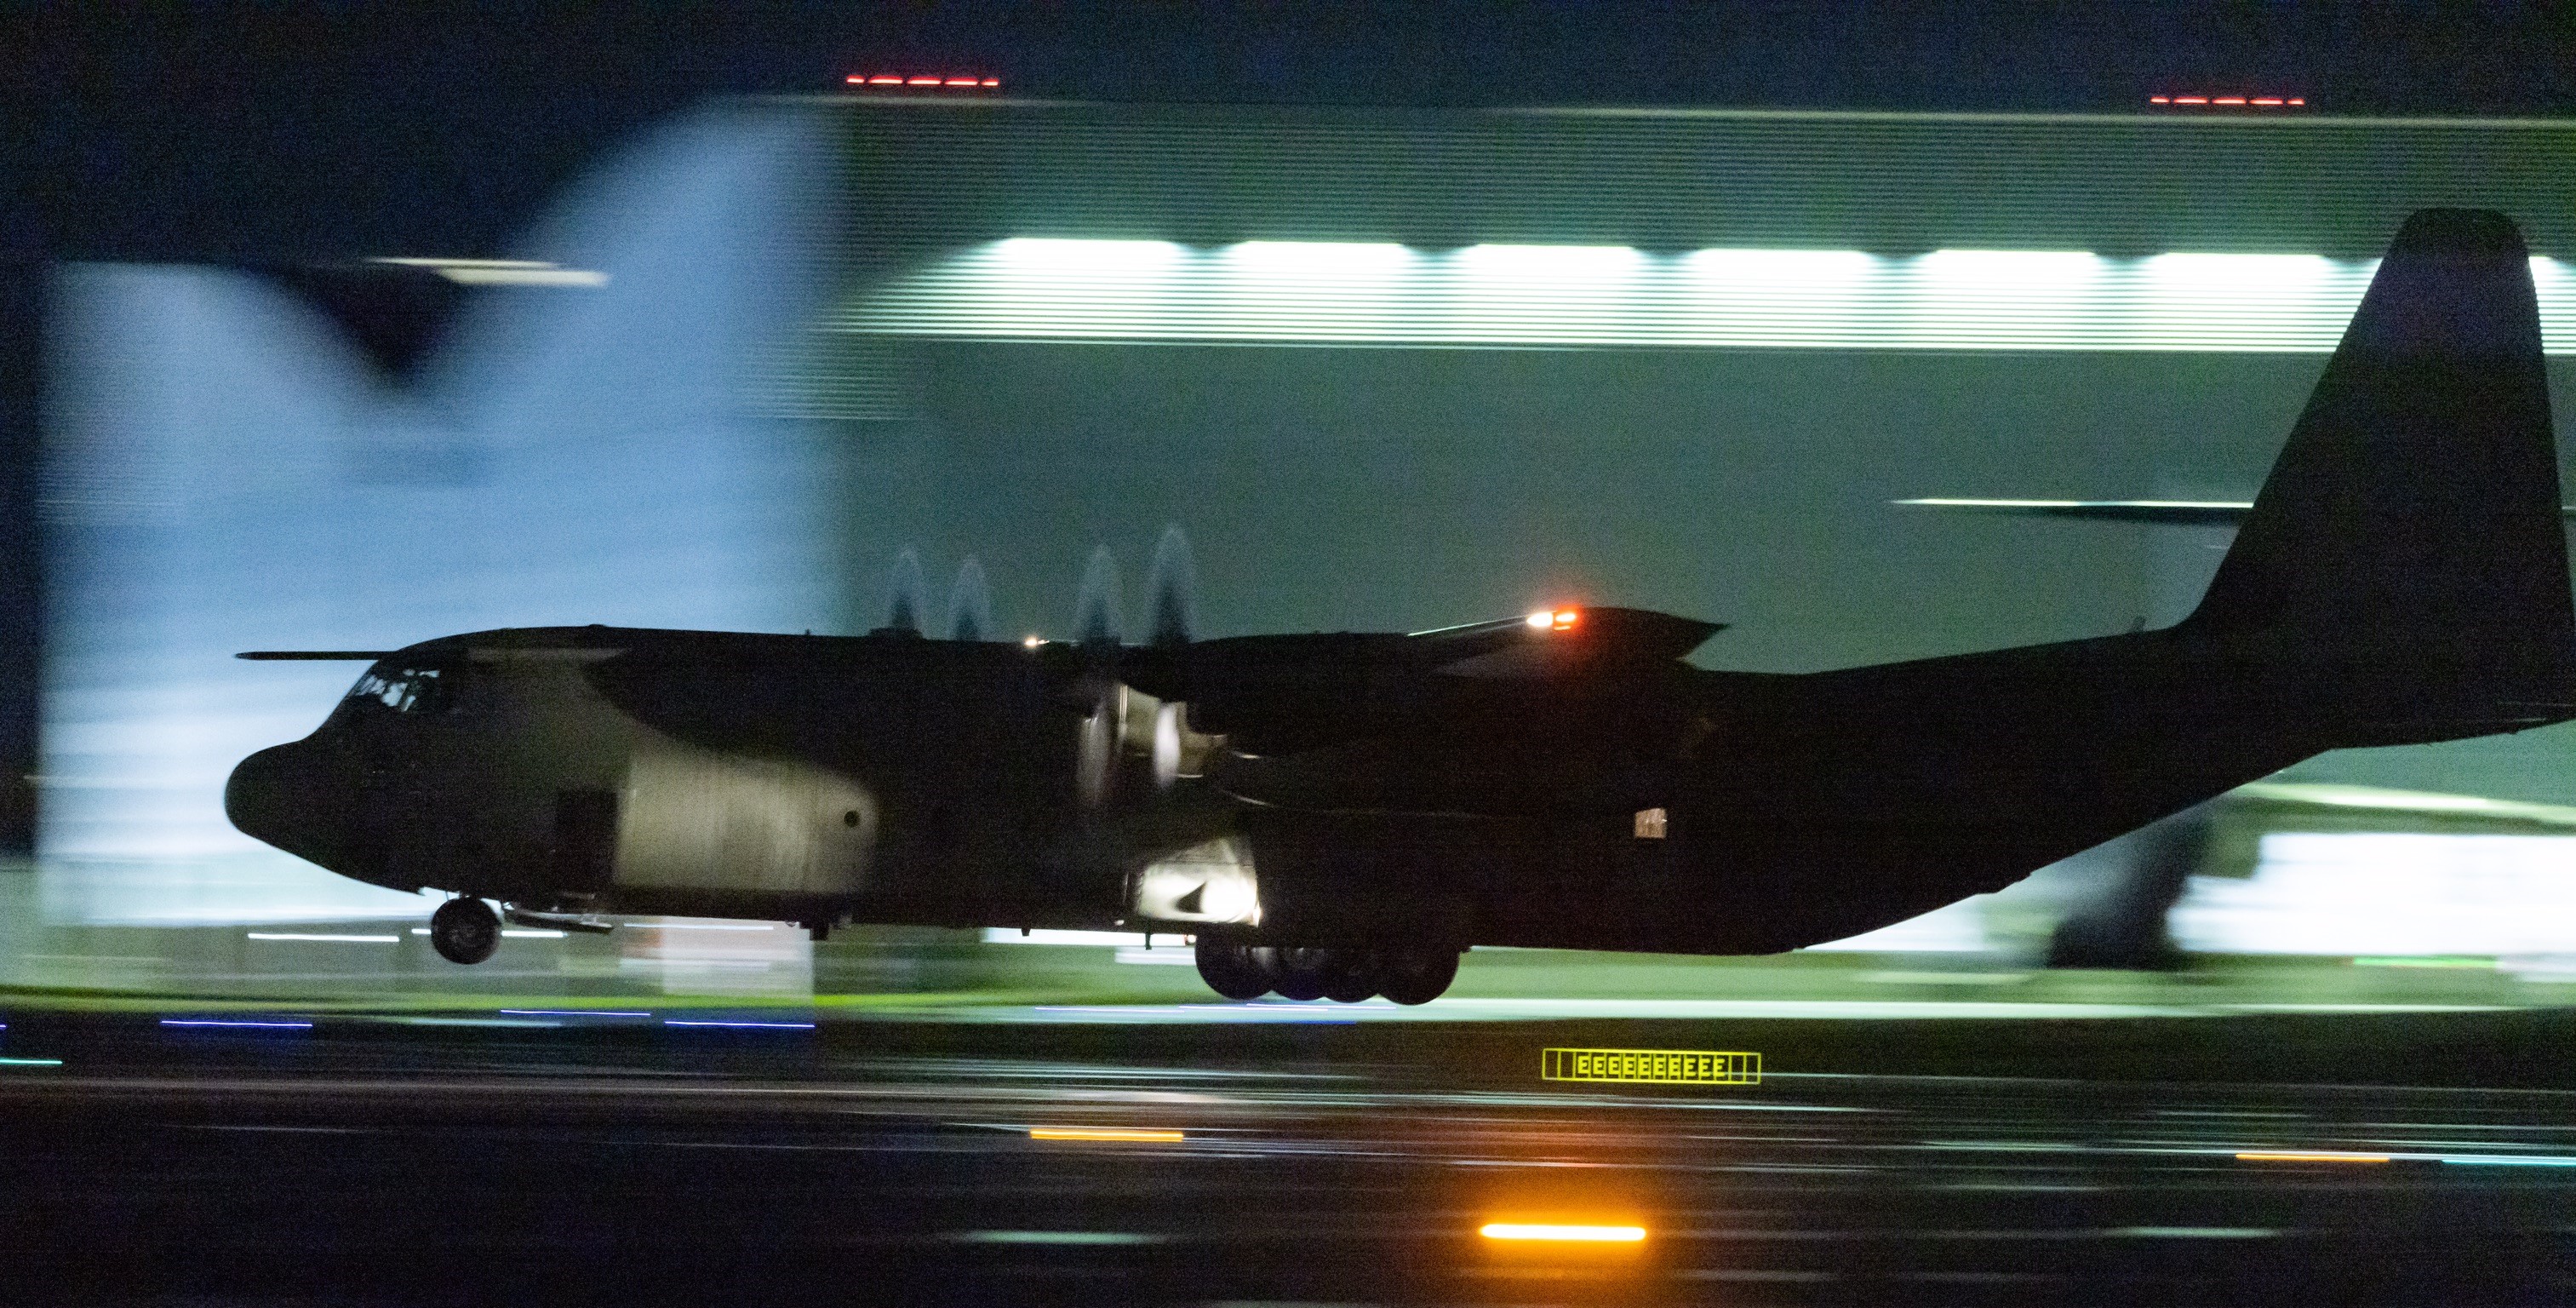 Image shows the RAF Hercules aircraft taxiing on the airstrip at night.